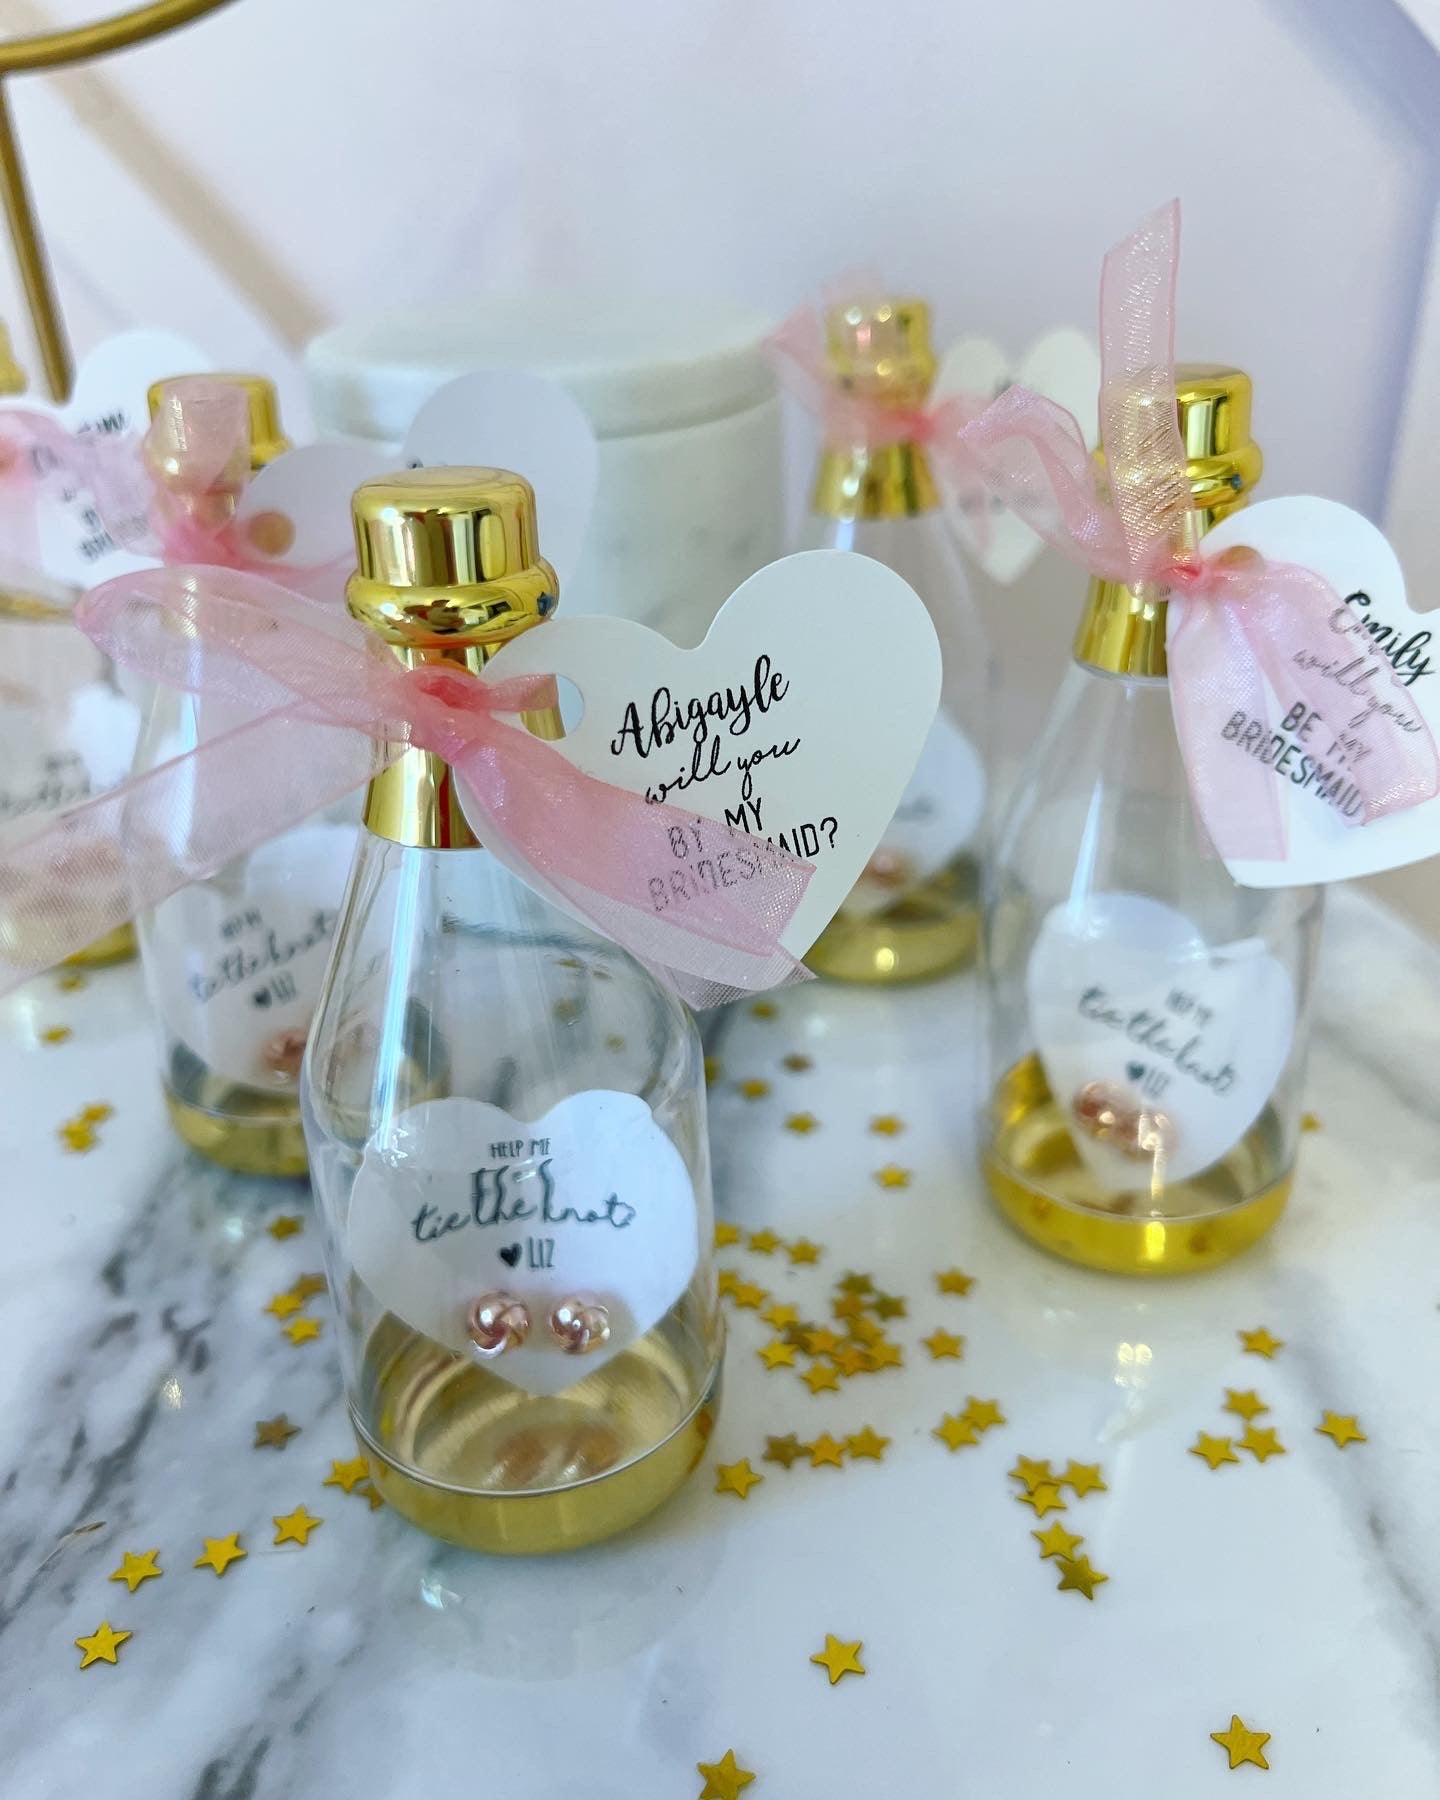 Bottle with Knot Earrings Bridesmaid Gift